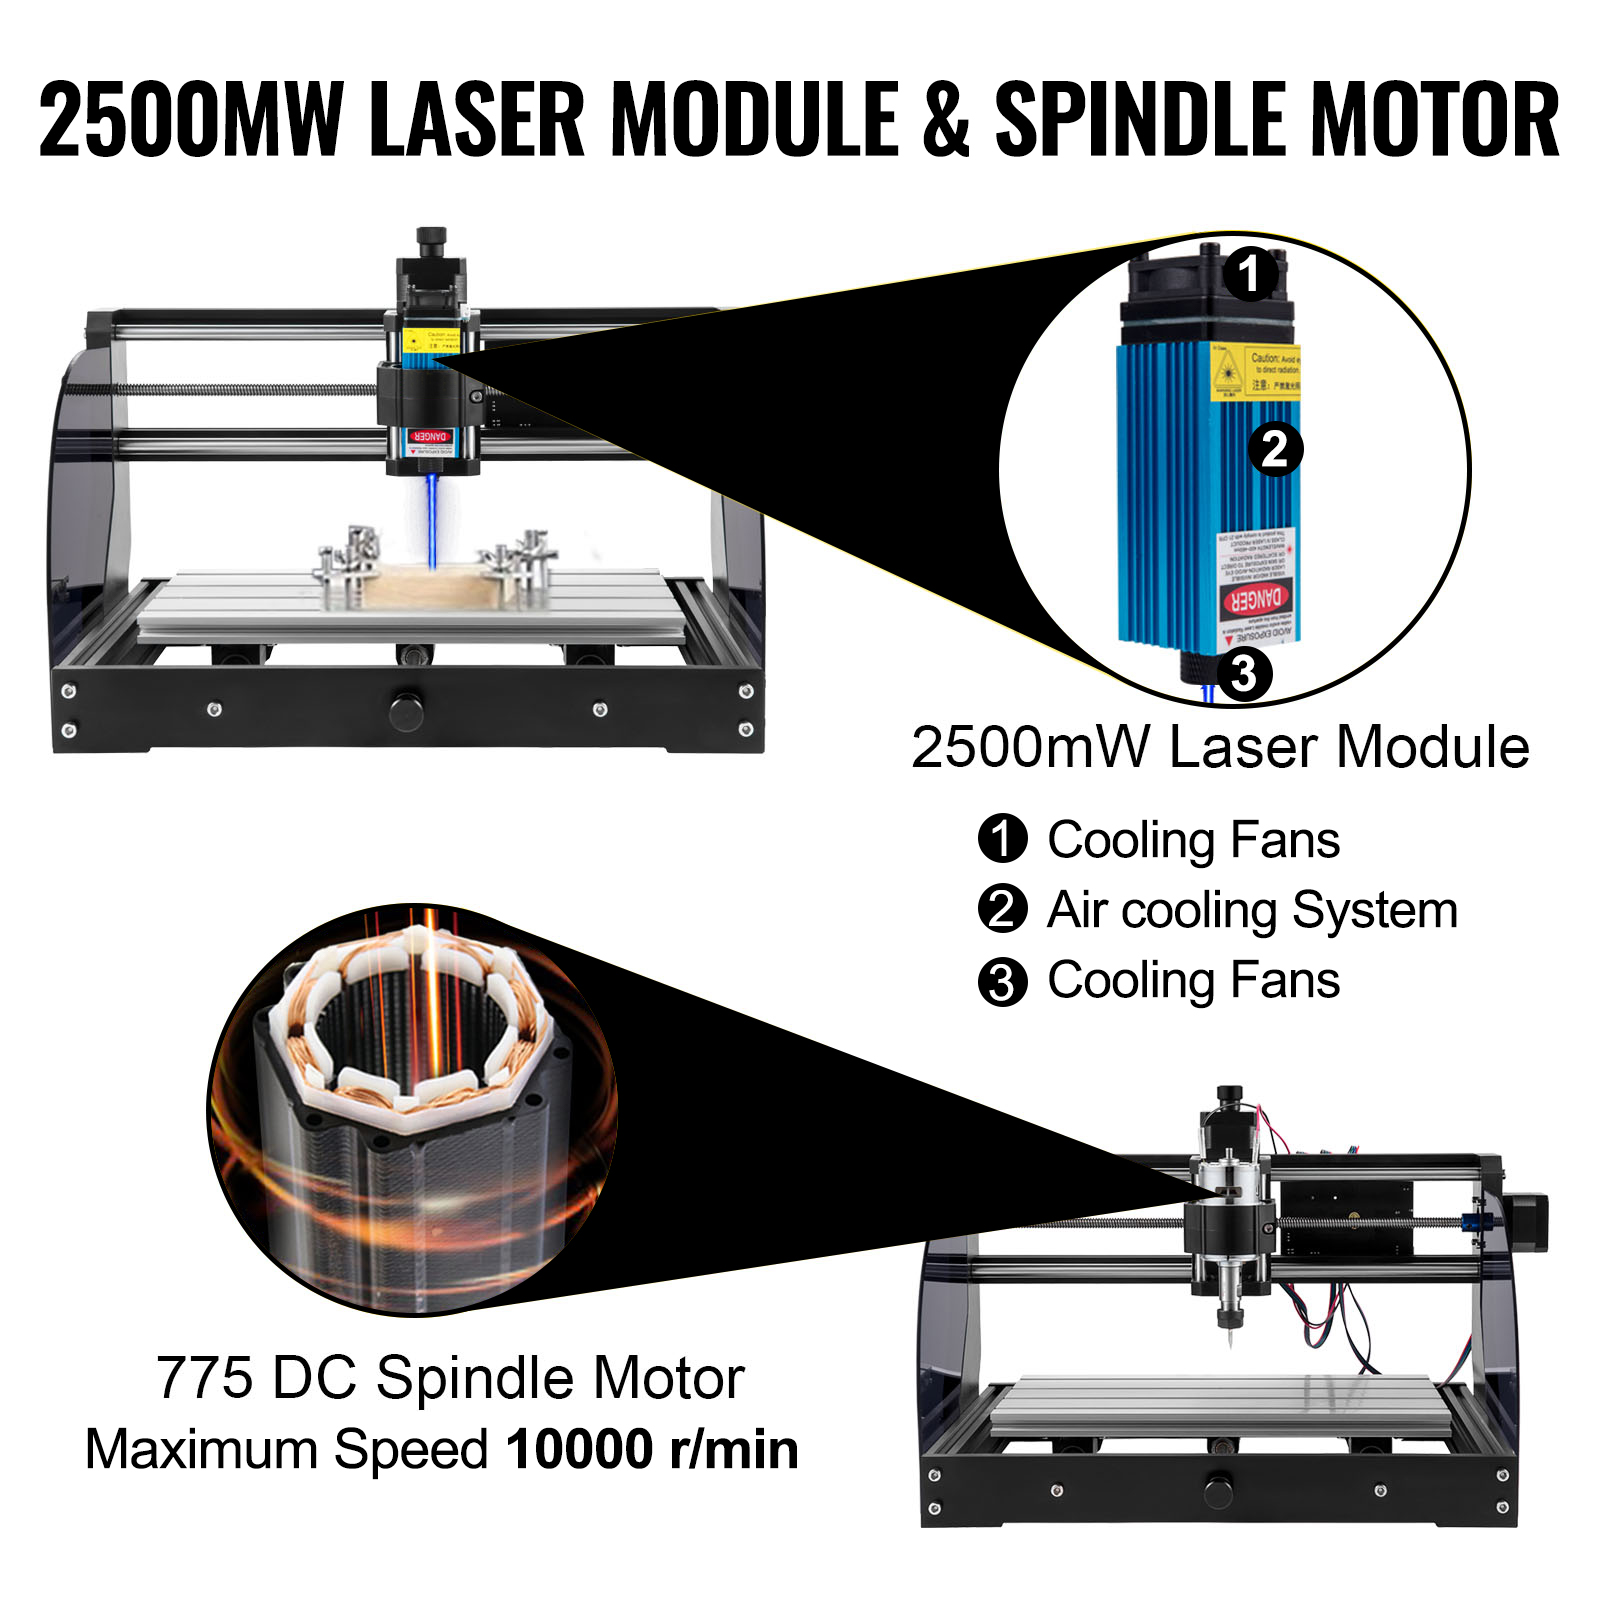 Cnc 3018, 3 Axis,2.5w laser